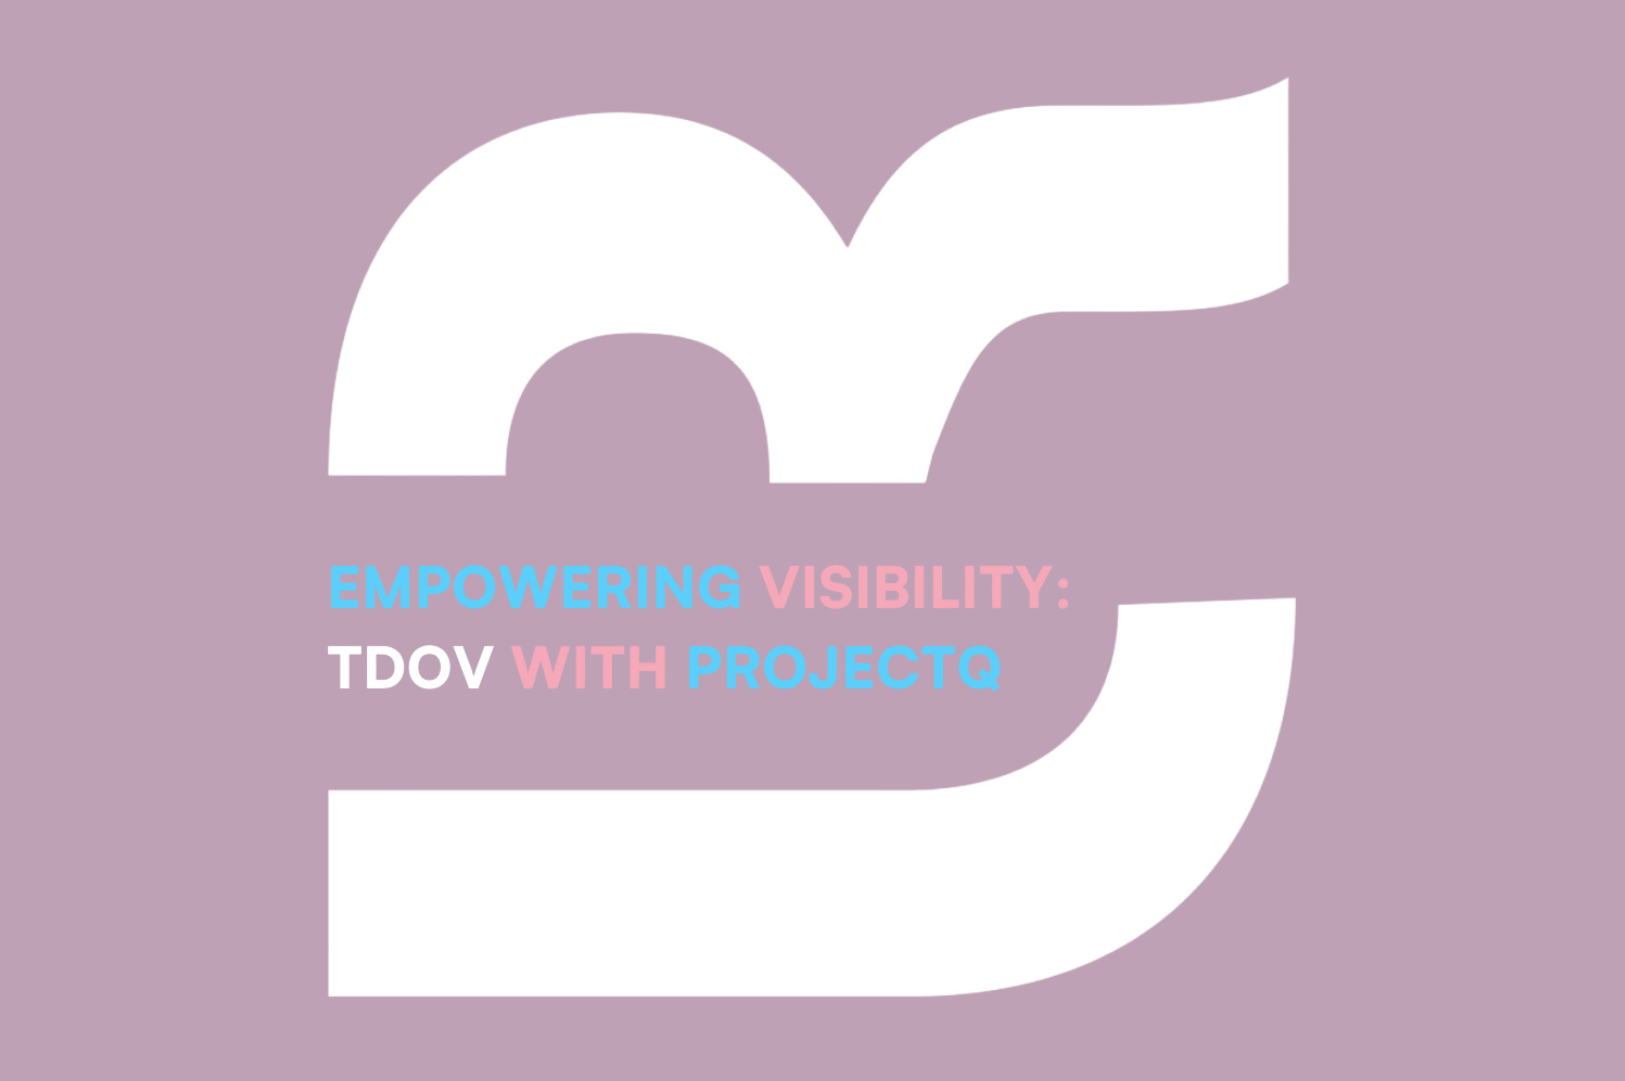 Empowering Visibility: TDOV with ProjectQ